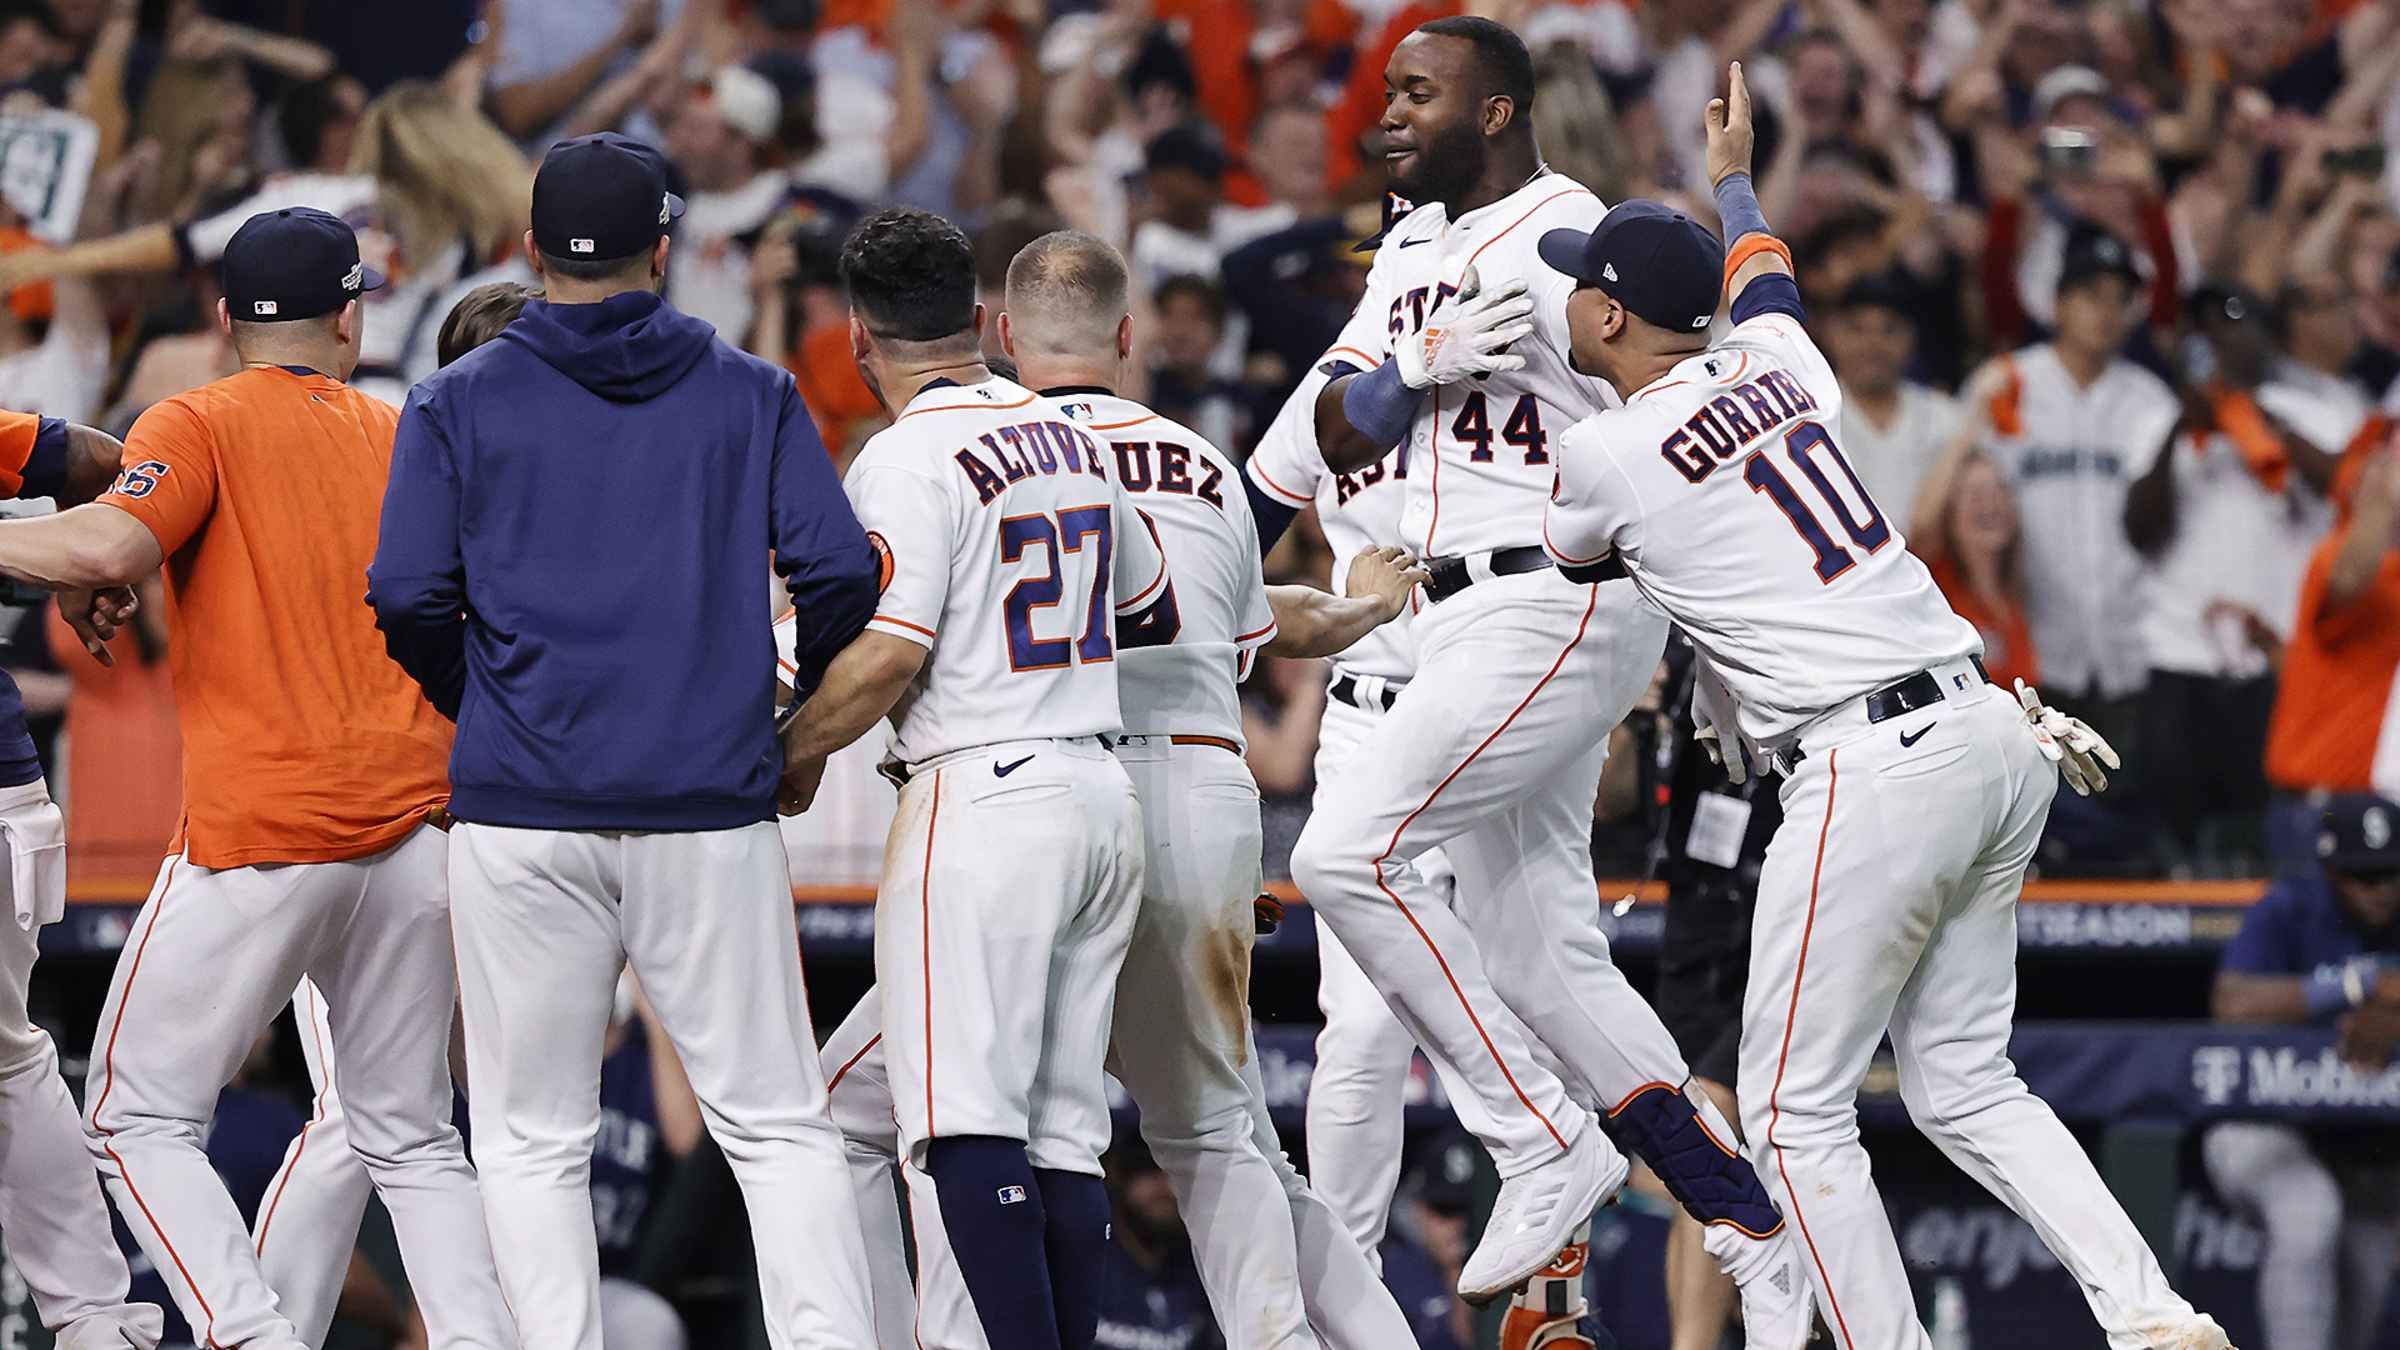 Mariners rally with 7 runs in 8th inning, top Astros 7-5 MLB - Bally Sports